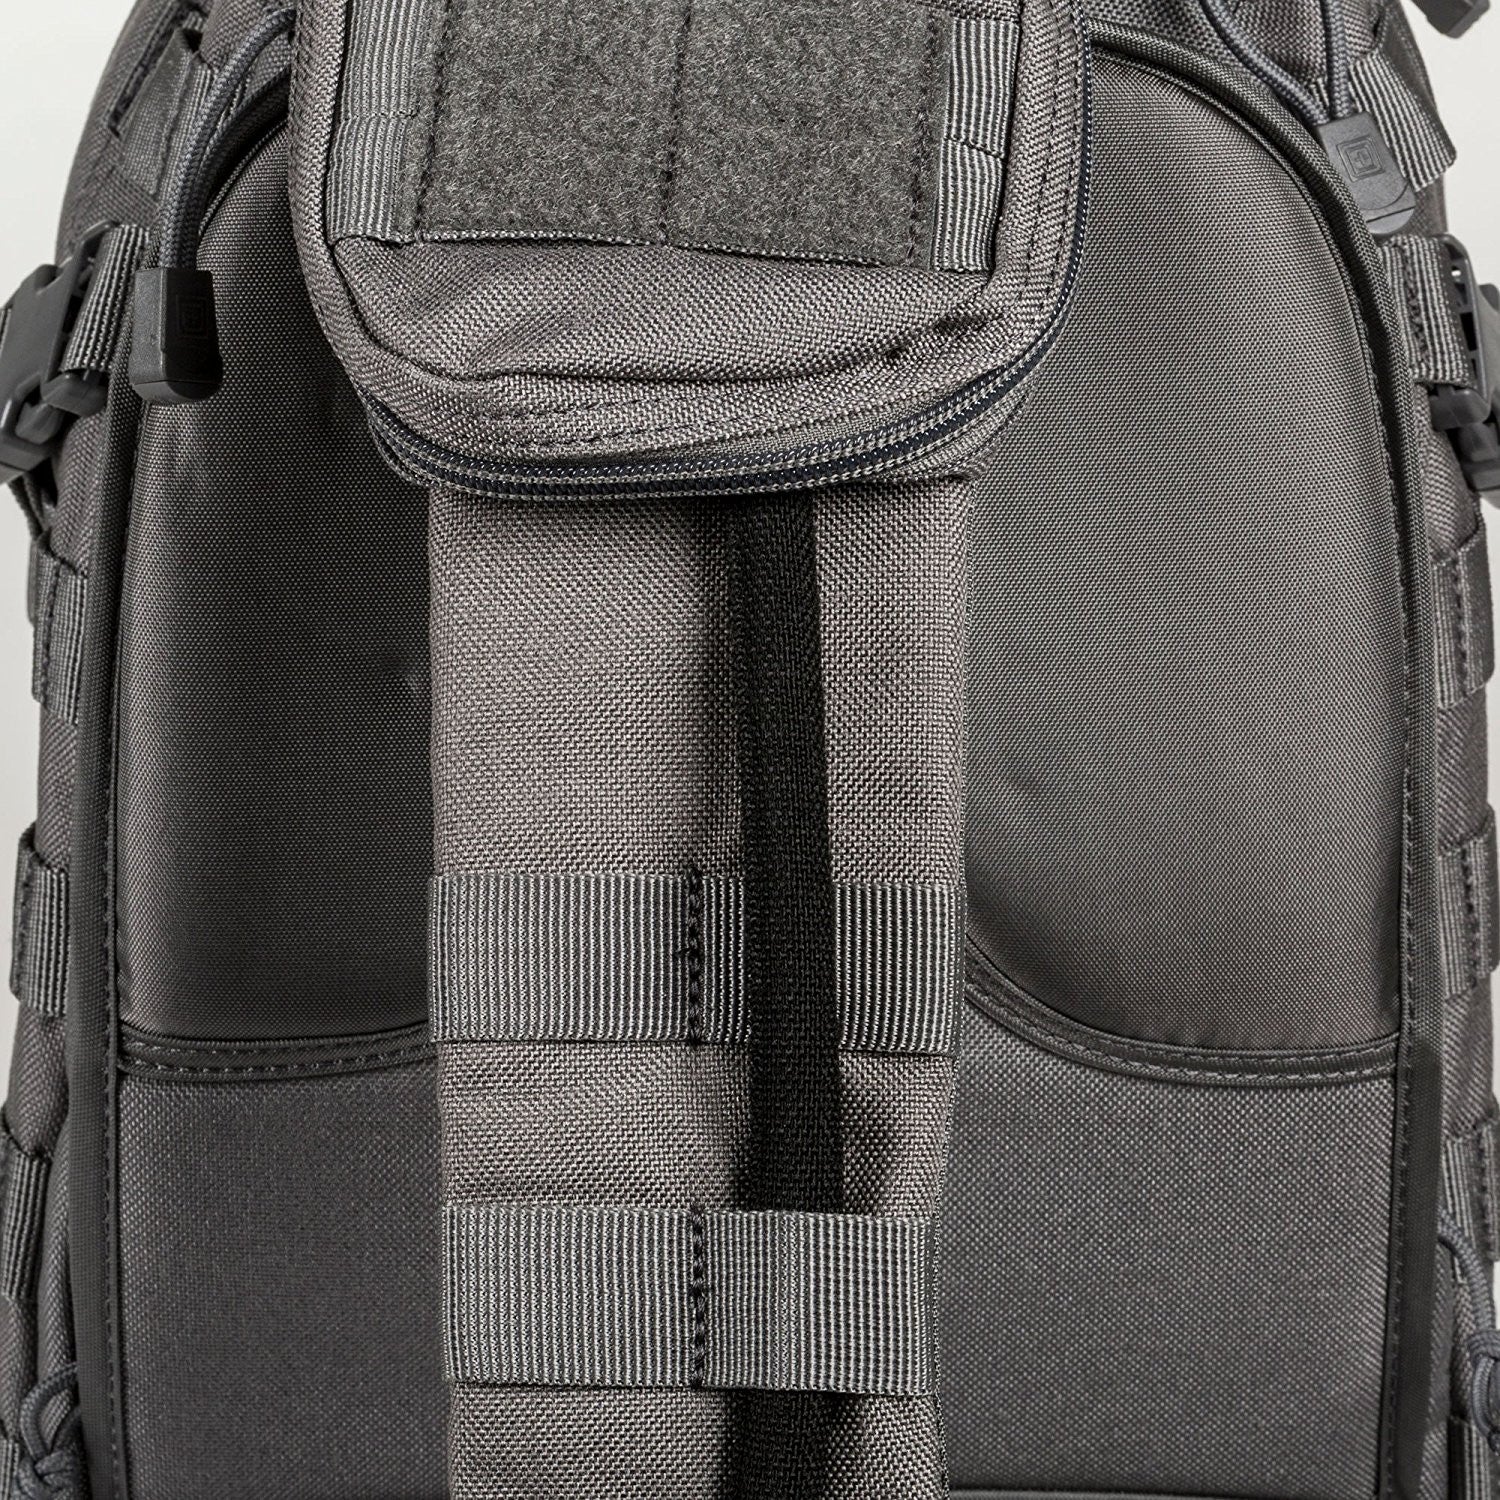 the back of a gray backpack with straps